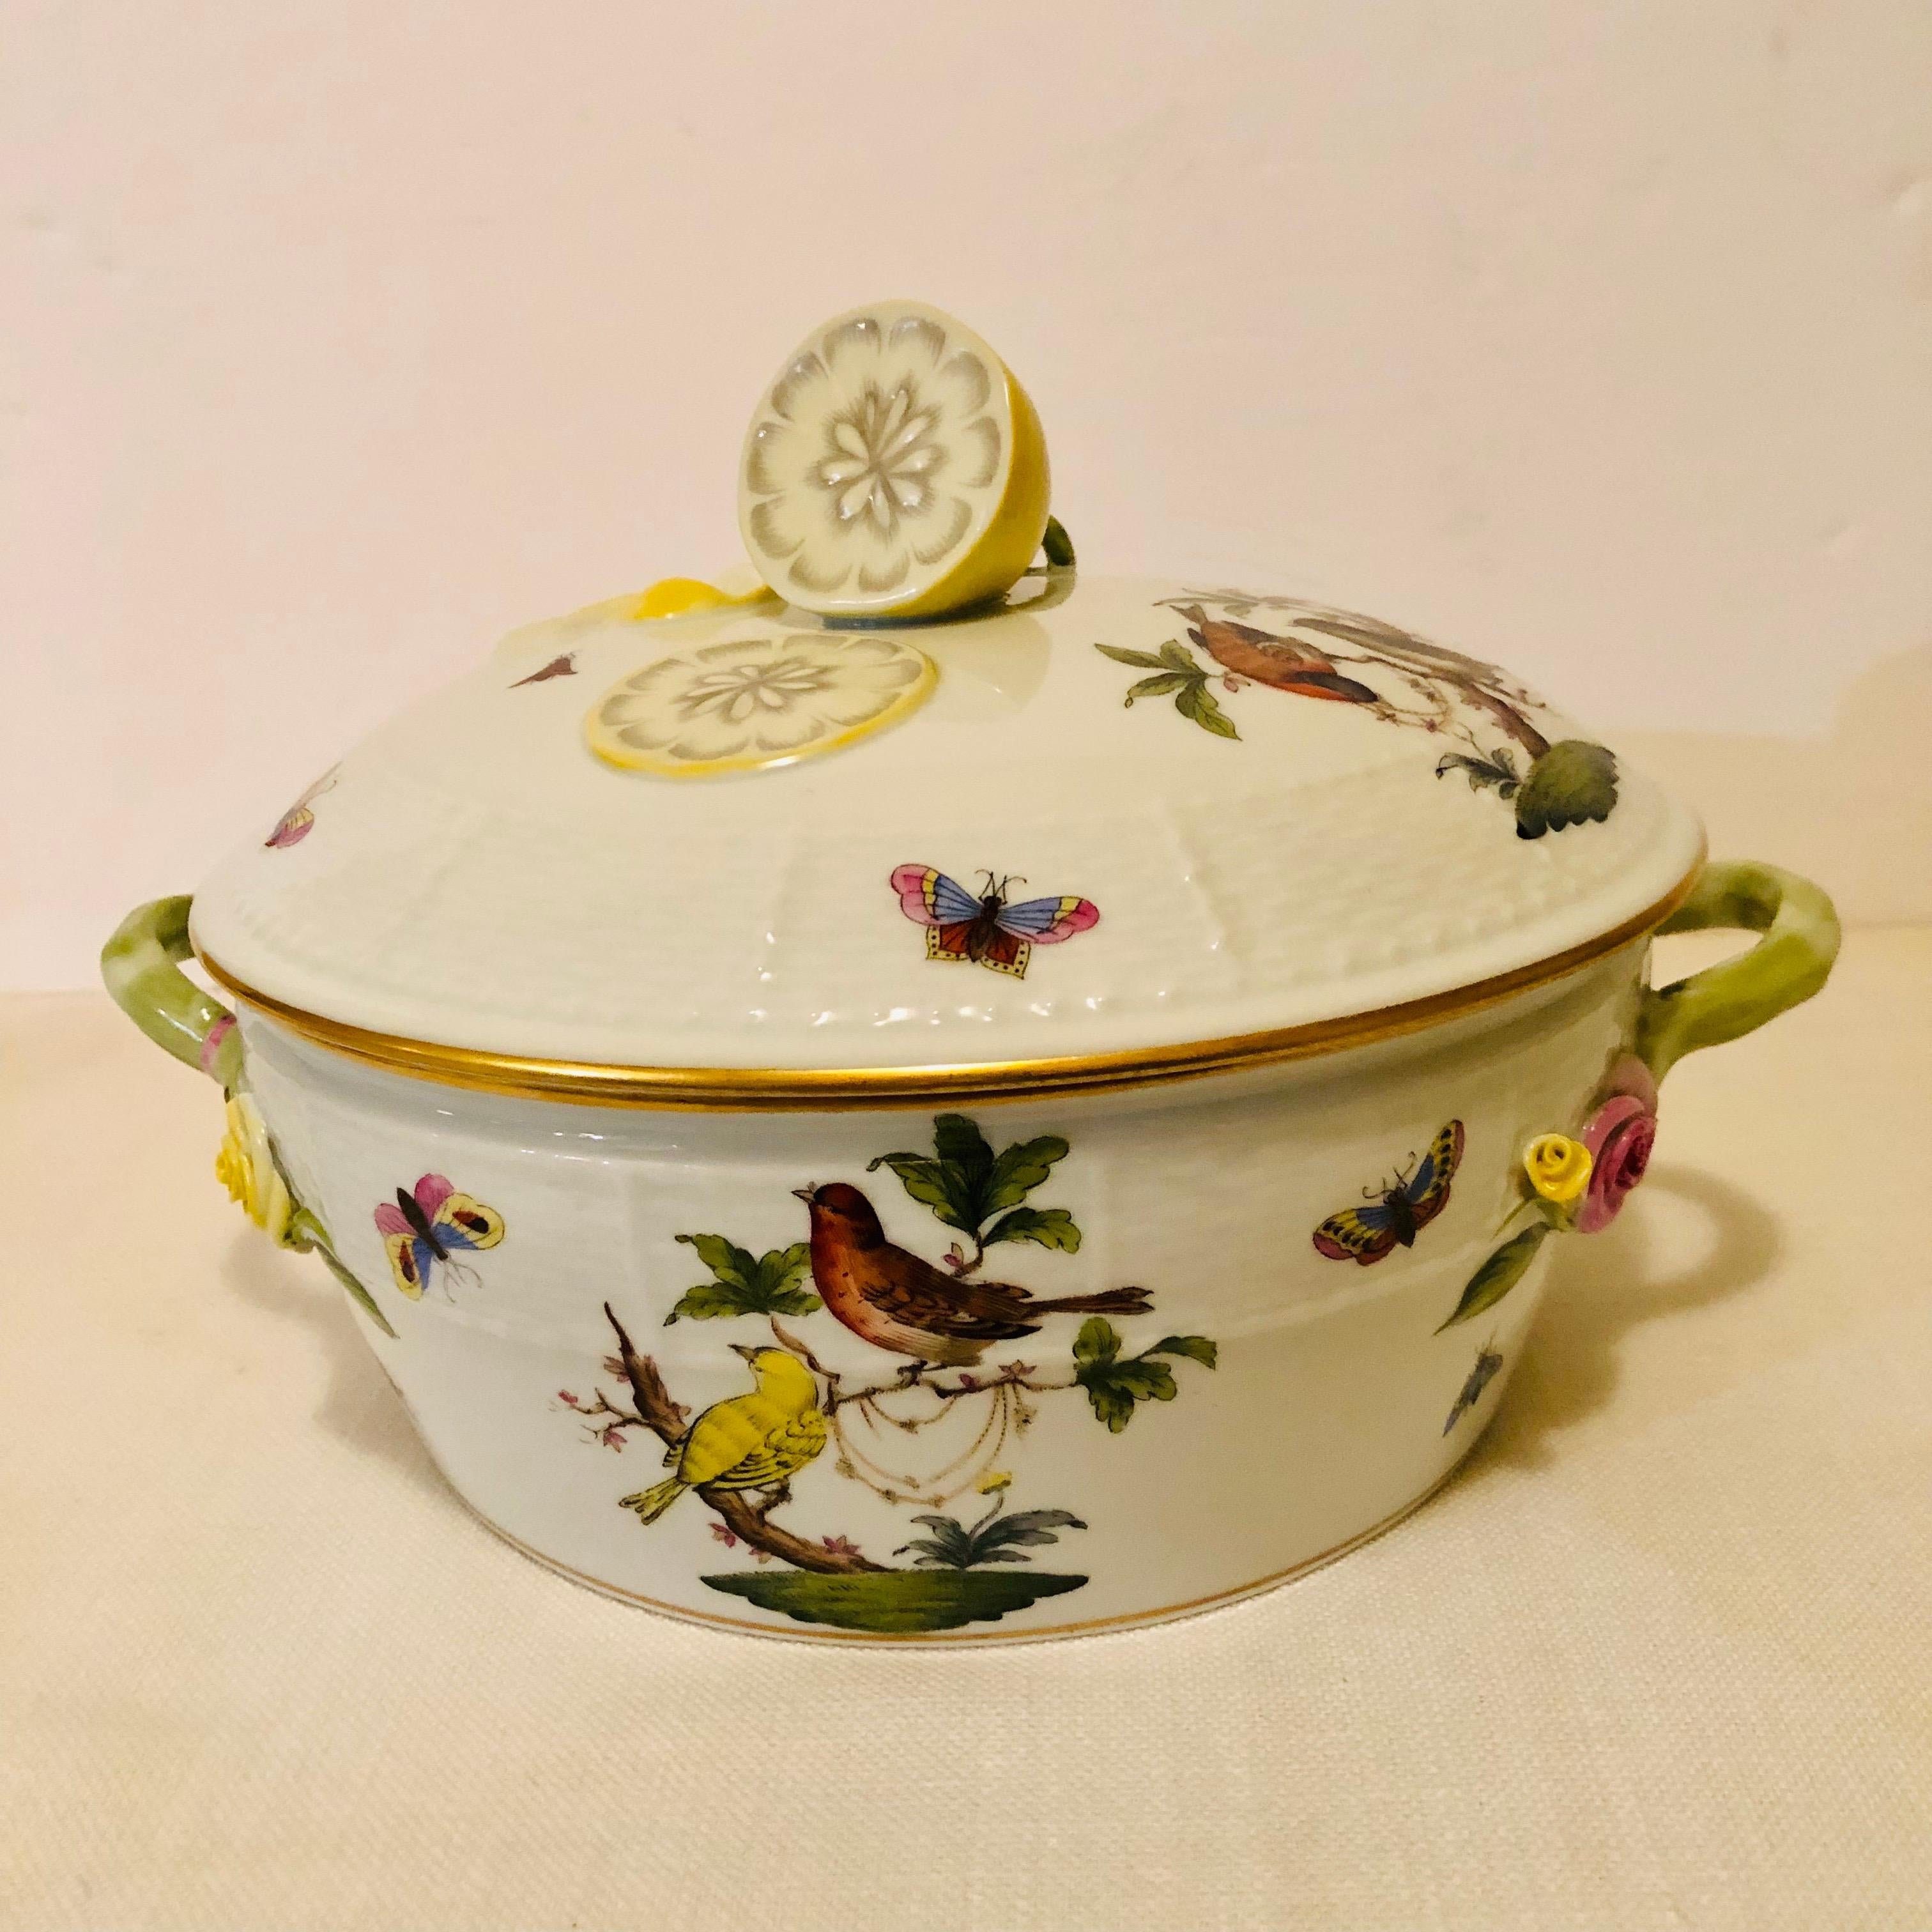 Porcelain Hand Painted Herend Rothschild Bird Covered Bowl with a Raised Lemon on the Top